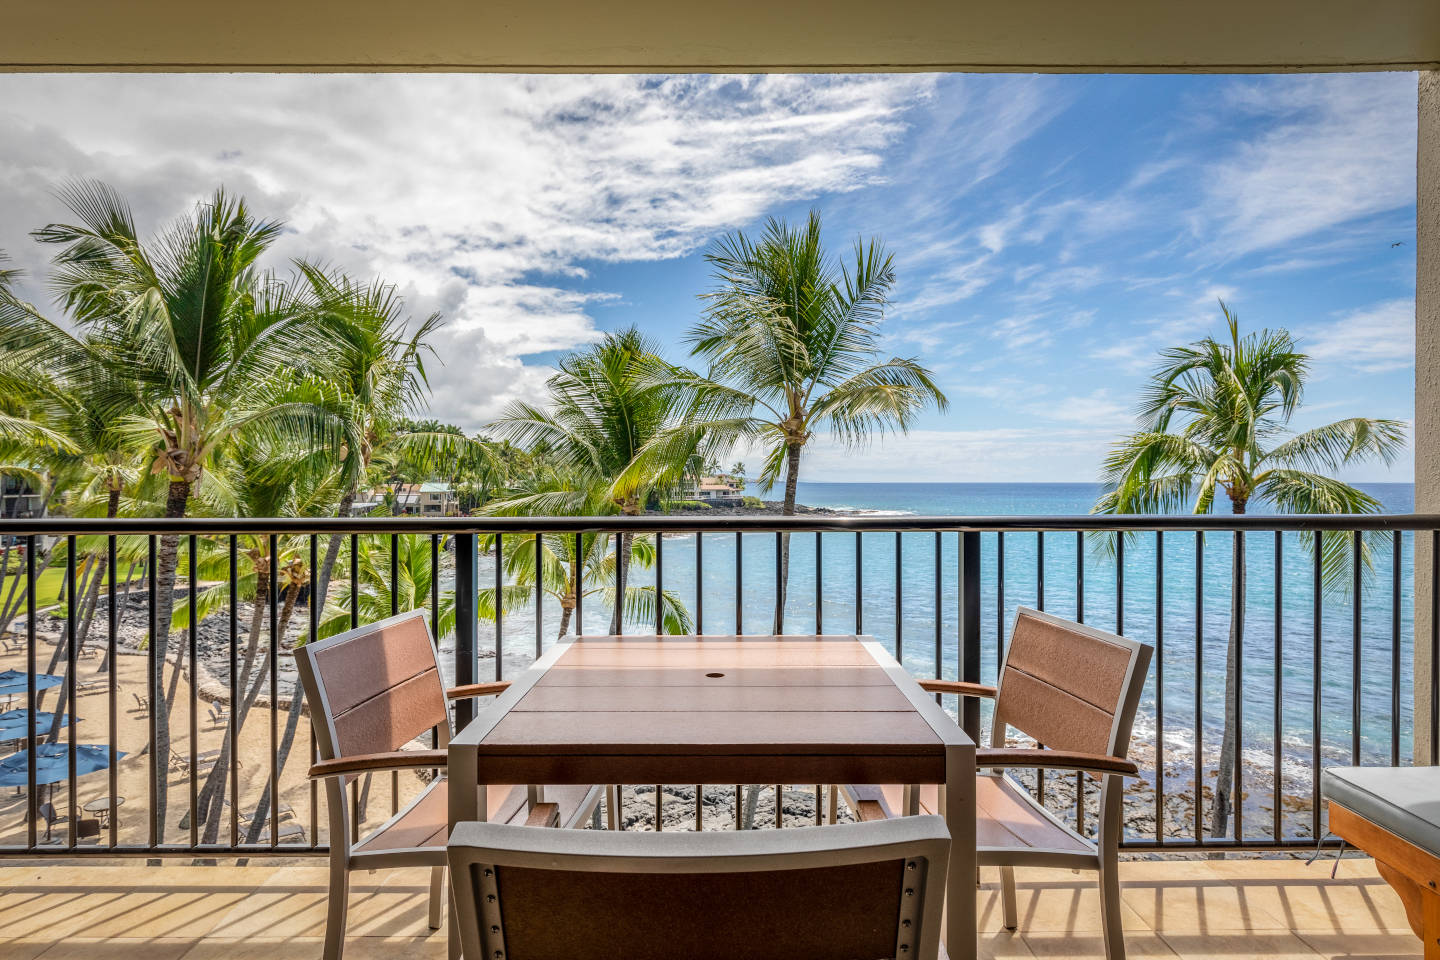 Balcony overlooking the beach with coconut trees and blue sky